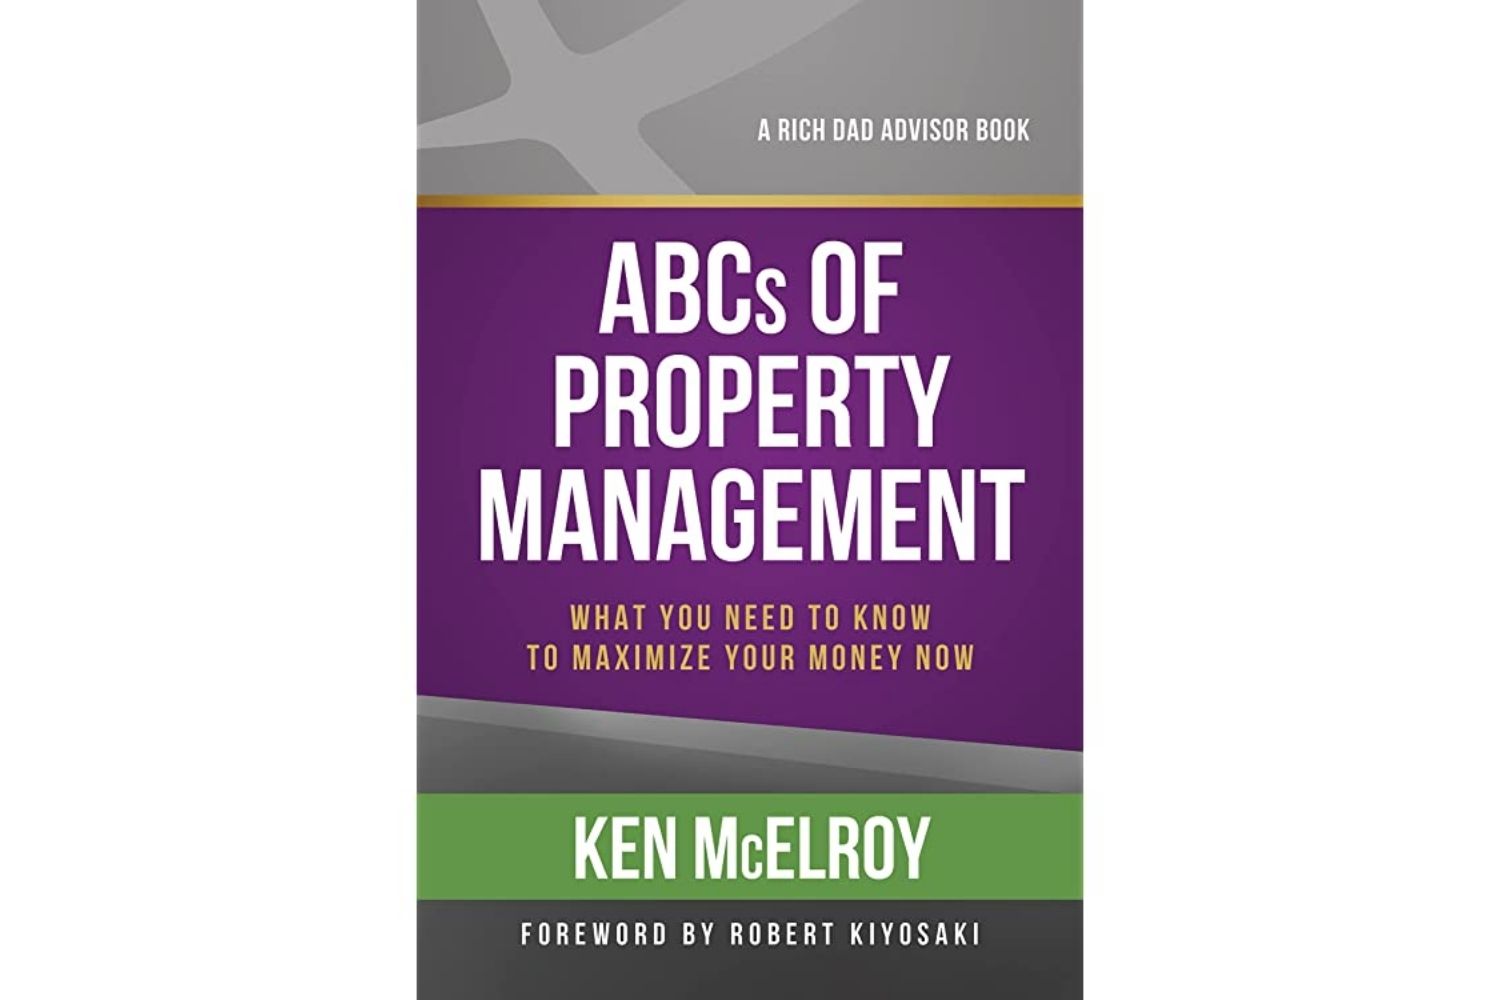 The Best Real Estate Books Options: The ABCs of Real Estate Investing